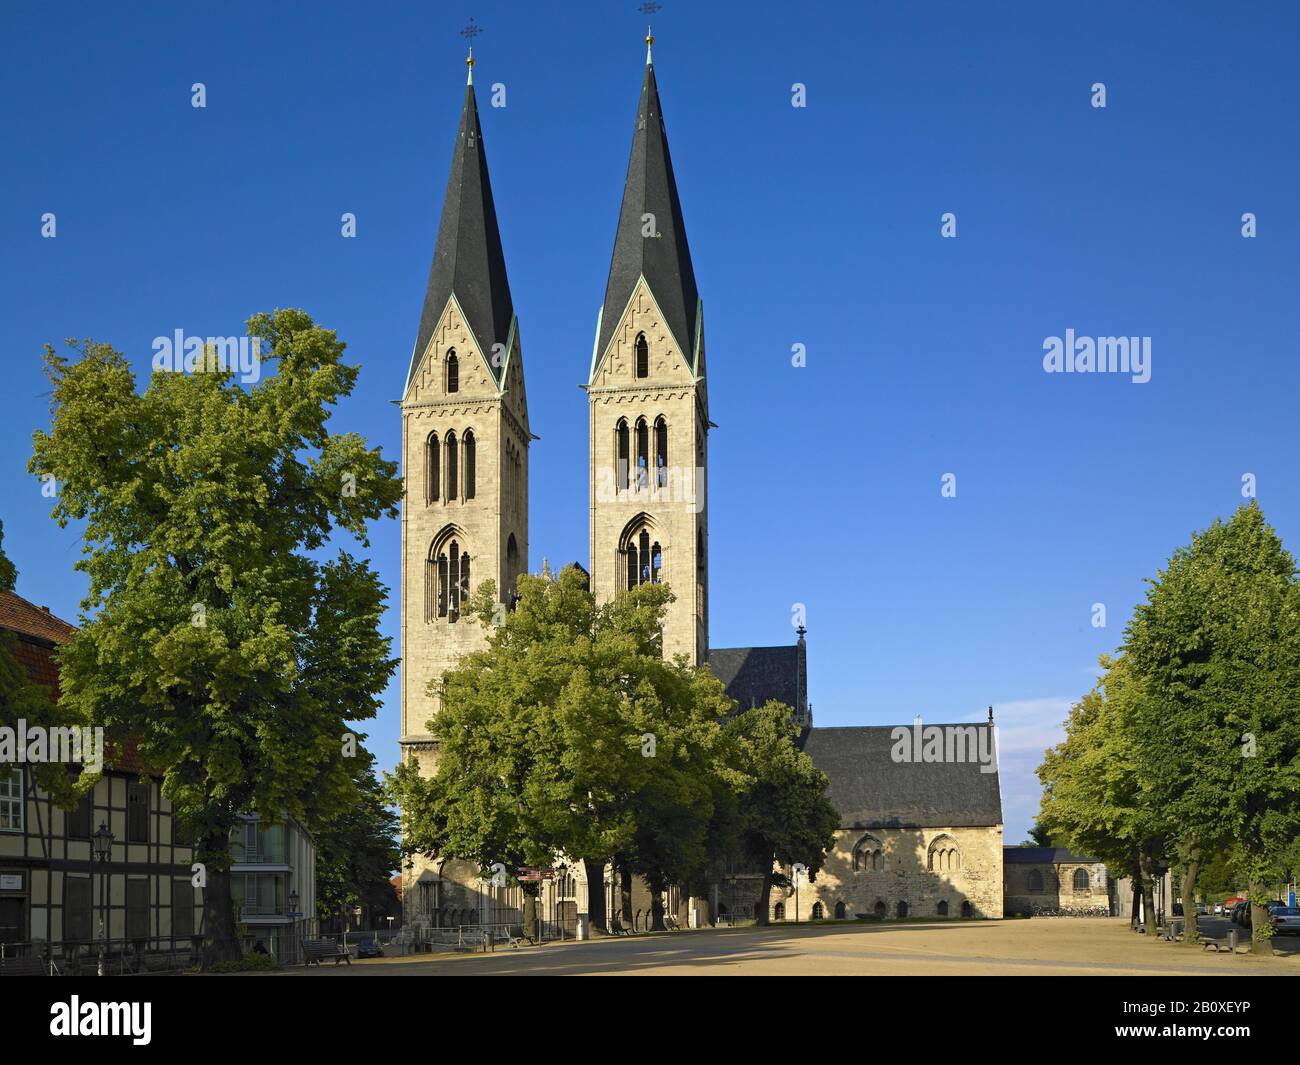 Cathedral square with St. Stephen's Cathedral and St. Sixtus, Halberstadt, Saxony-Anhalt, Germany, Stock Photo